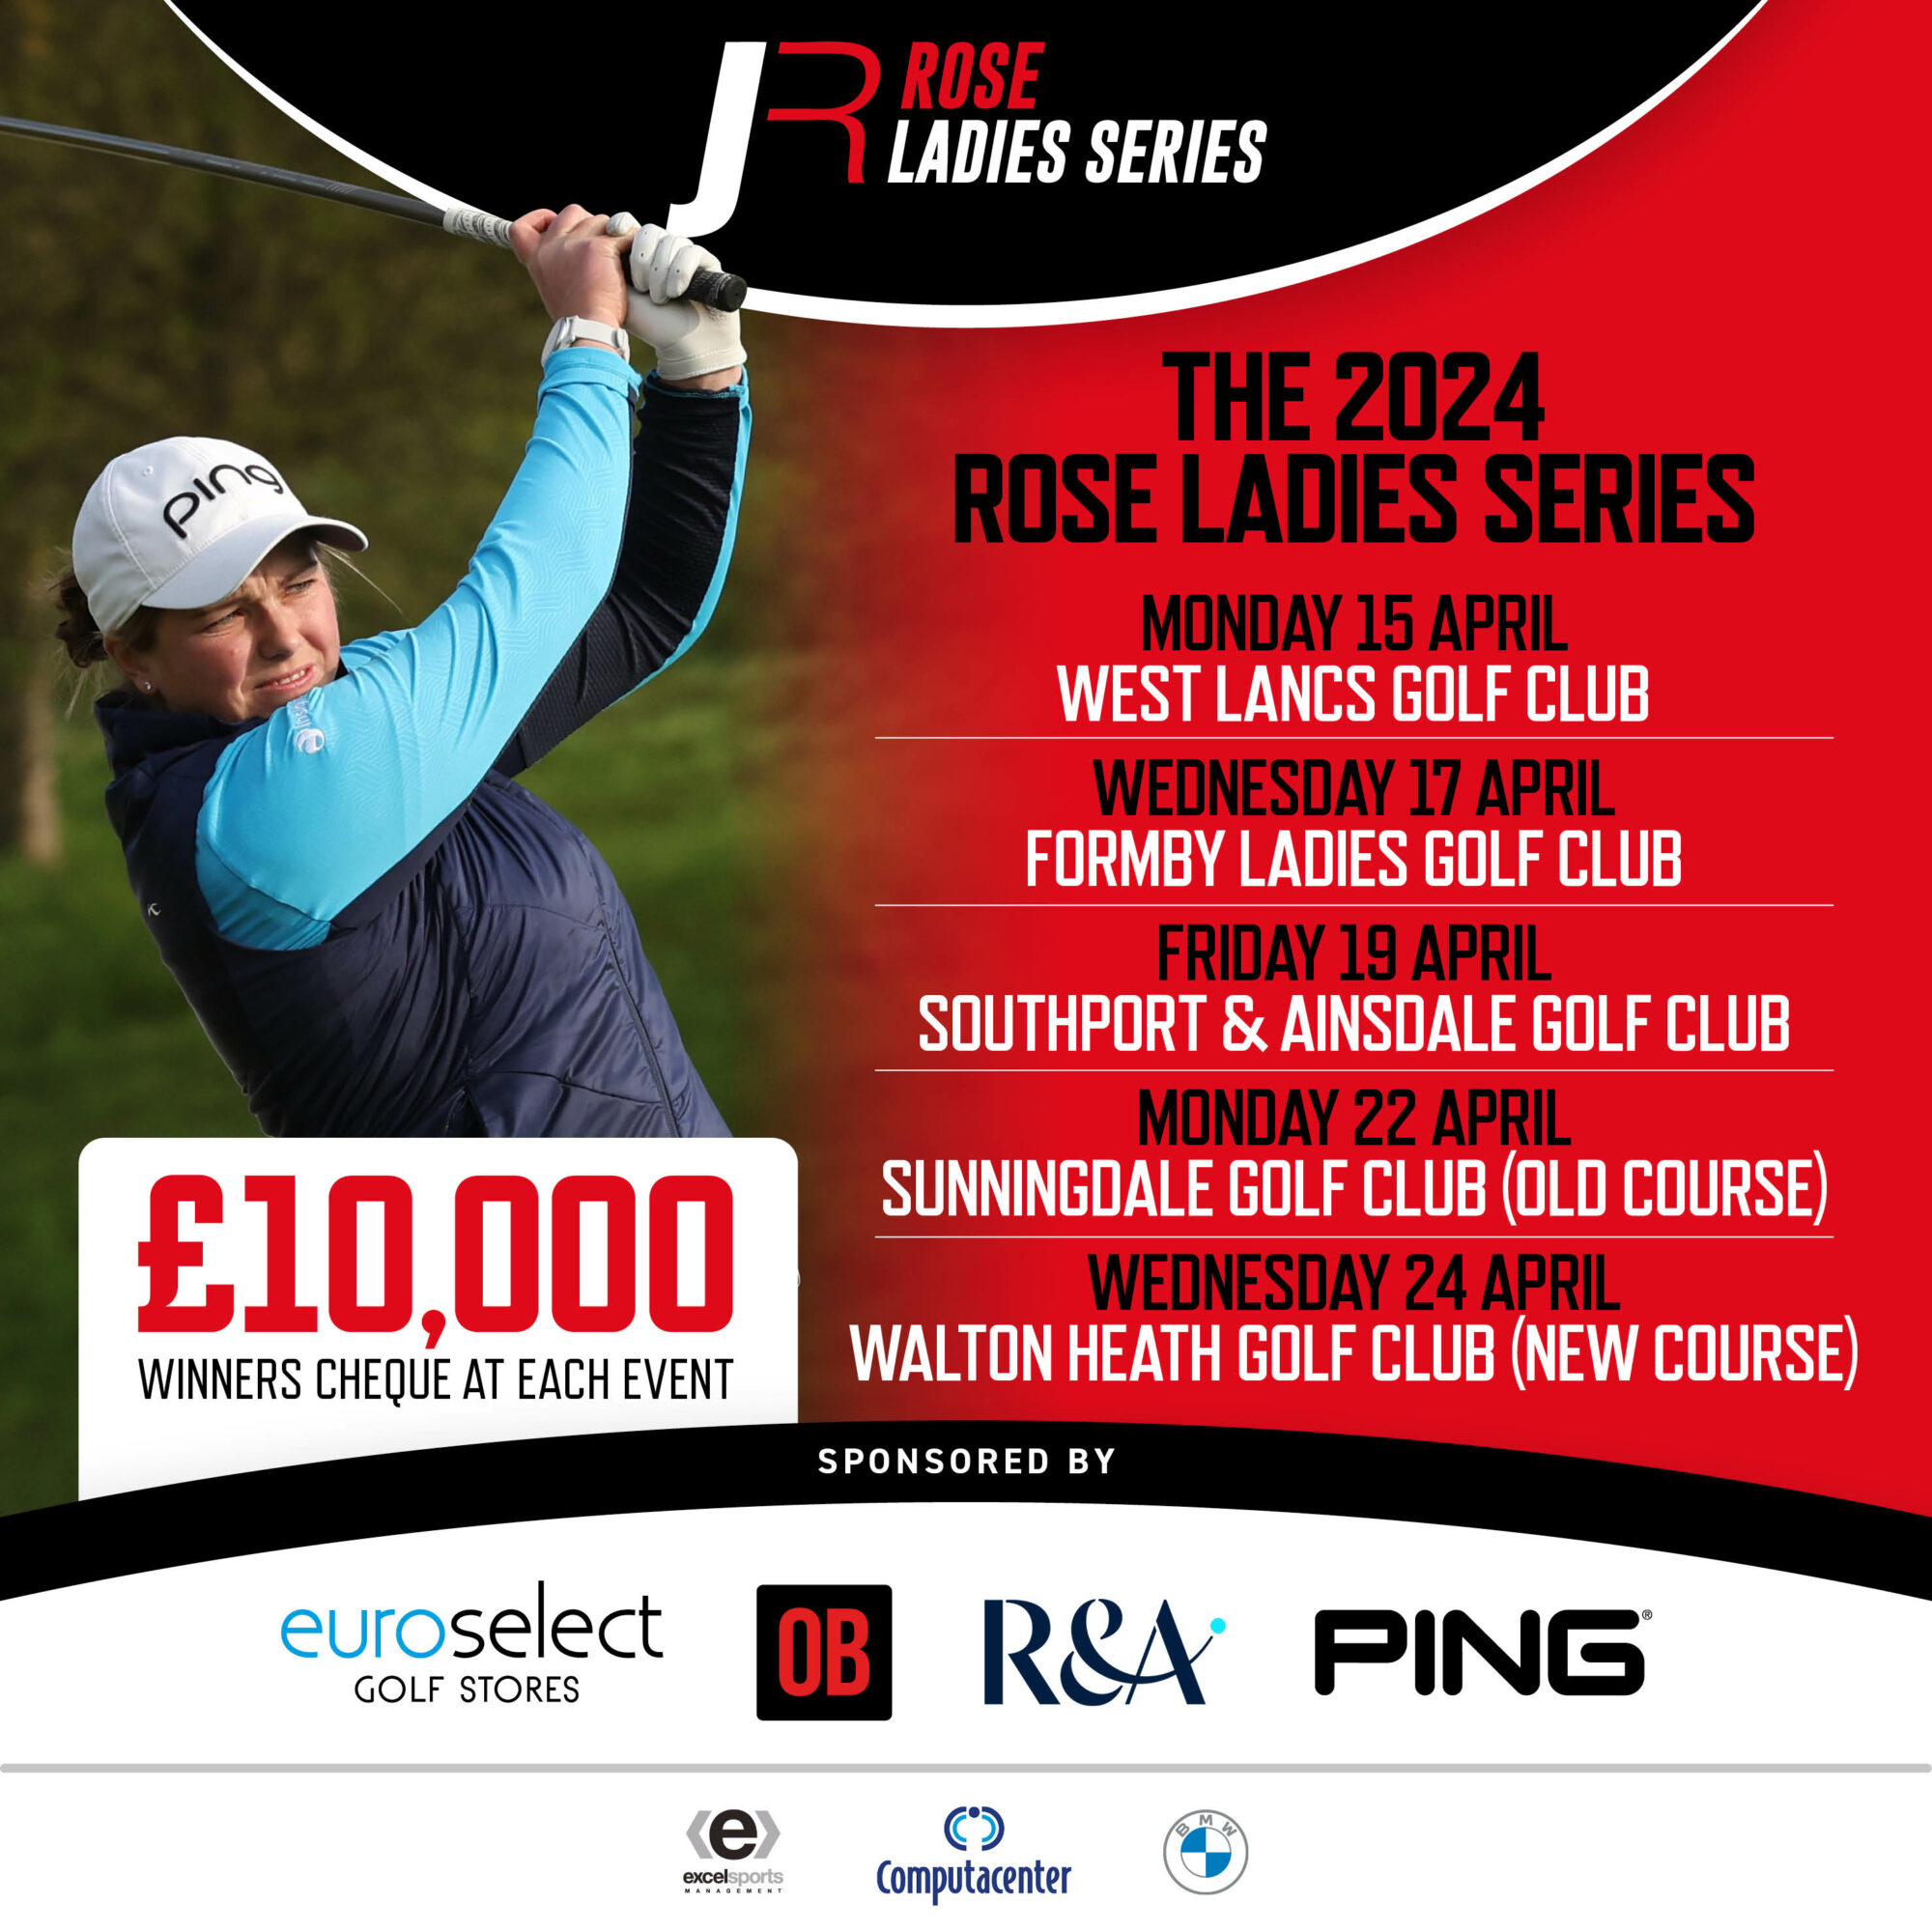 Rose Ladies Series 2024 schedule with a woman playing golf on the left hand side, wearing a white Ping cap.

Prize money: £10000 winners cheque at each event

Schedule:
- Monday 15 April 2024 at West Lancs Golf Club
- Wednesday 17 April 2024 at Formby Ladies Golf Club
- Friday 19 April 2024 at Southport & Ainsdale Golf Club
- Monday 22 April 2024 at Sunningdale Golf (old course)
- Wednesday 24 April 2024 at Walton Heath Golf Club (new course)

Sponsored by: Euroselect golf stores, OB, R&A, Ping, Excelsports, Computacenter, BMW.